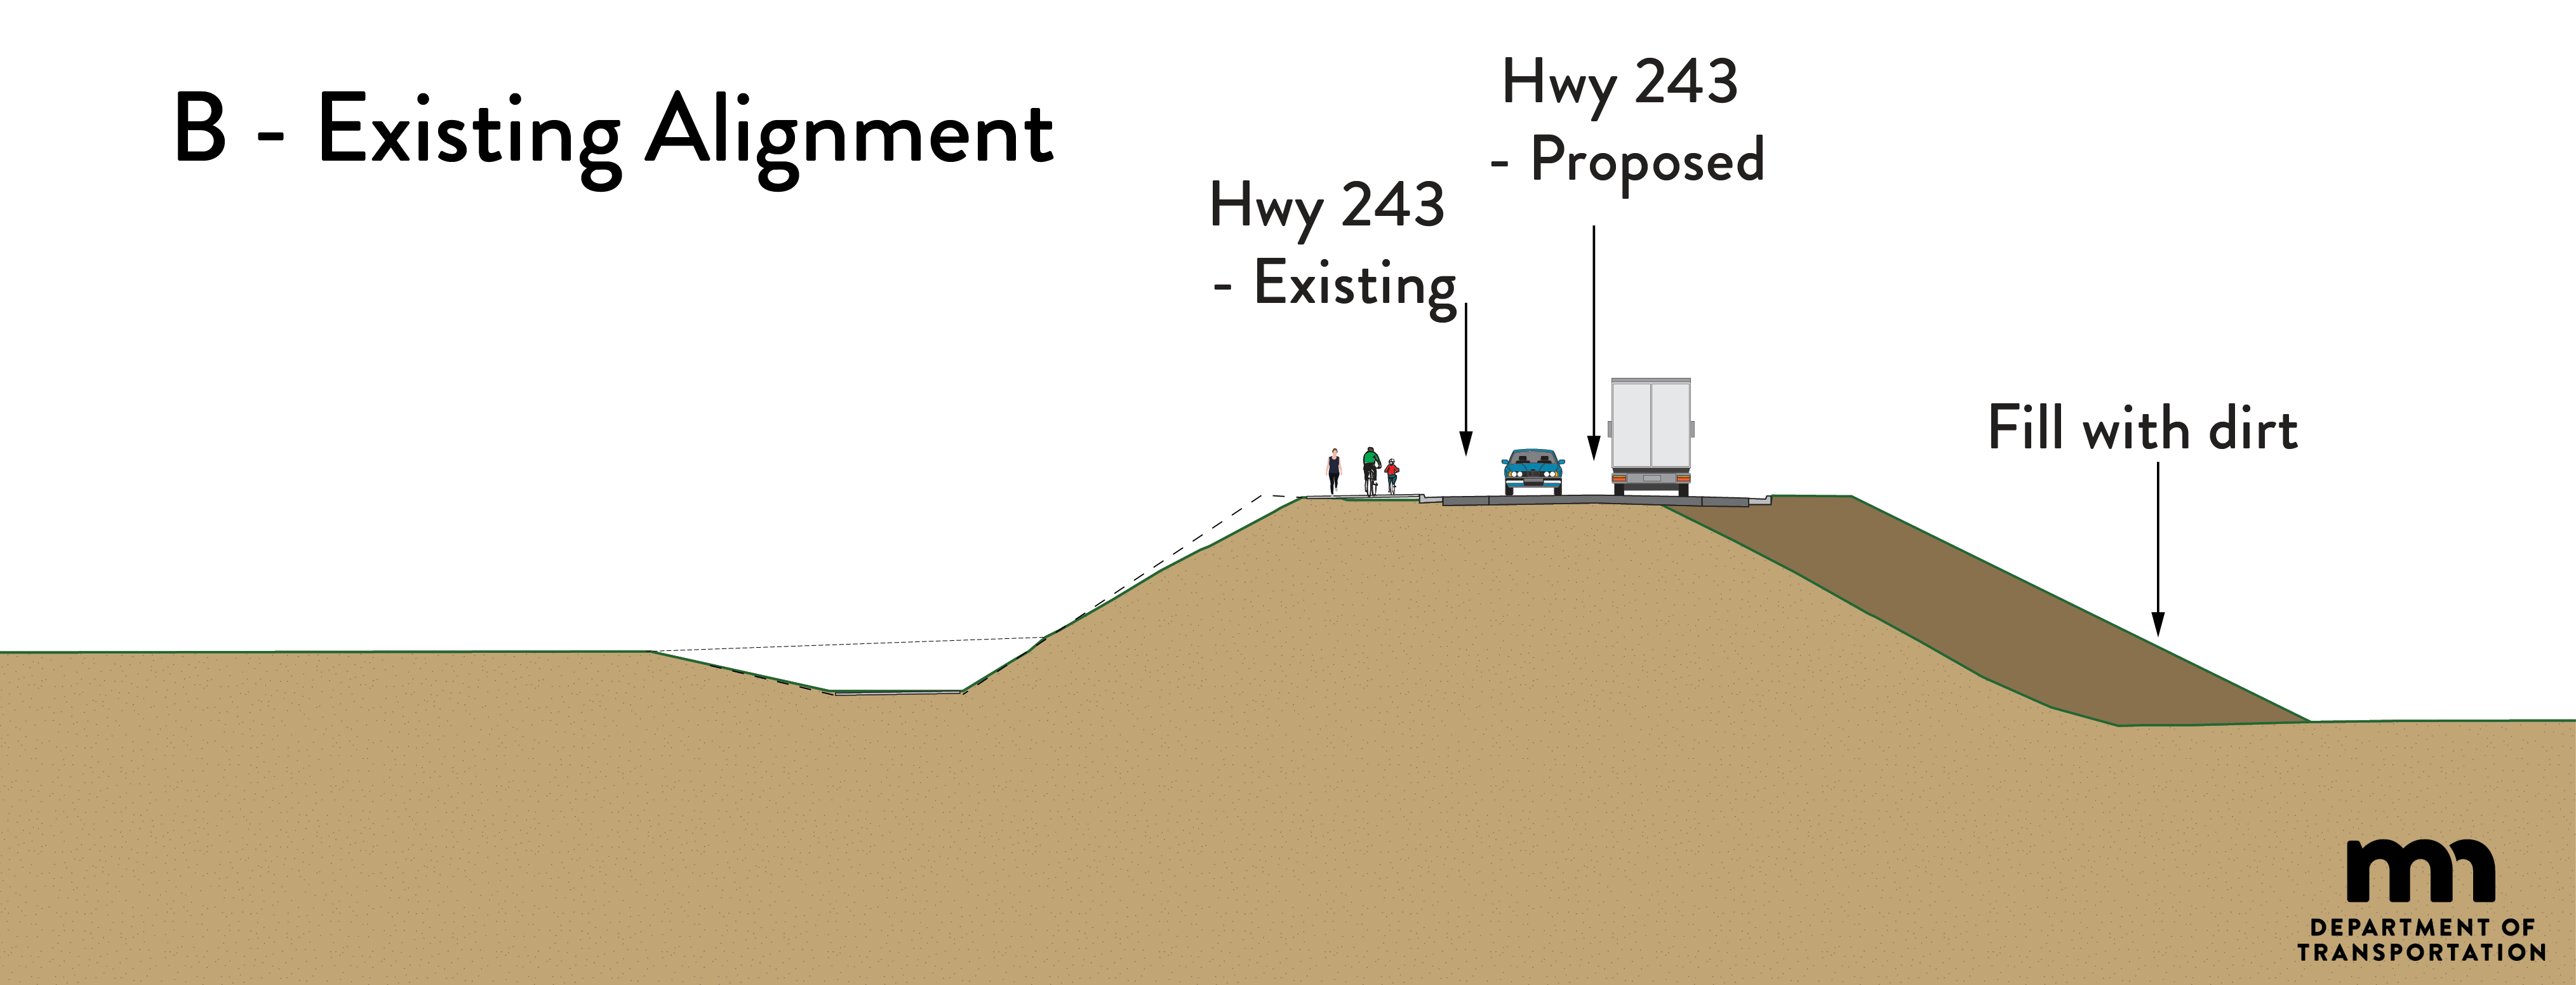 Shows cross section for alternative B on Minnesota side, including construction limits, proposed and existing road, and path for people walking or biking.